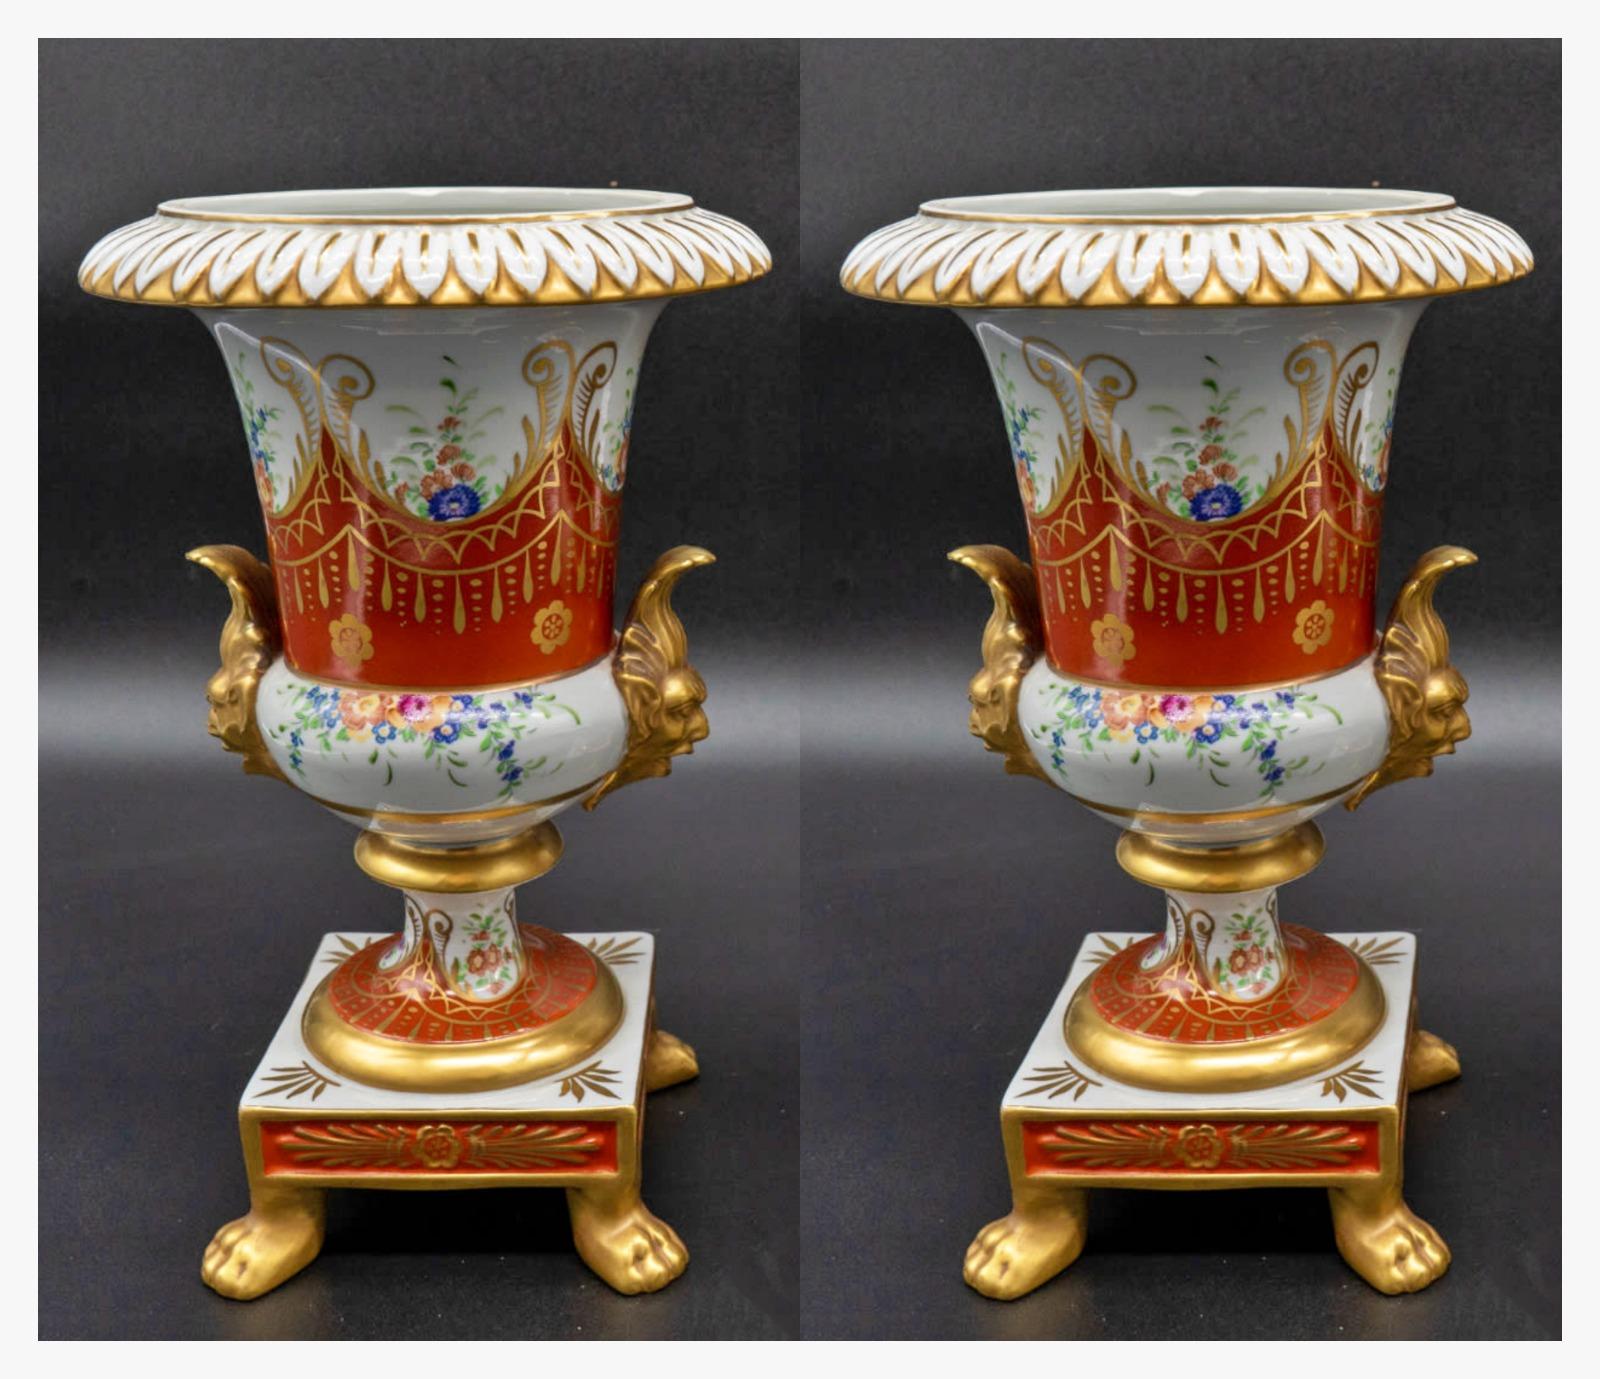 Pair of French Porcelain vases end 19th century/early 20th century
French, marked on the base, mouthpiece with relief decoration of leaves on a bulging body supported by a square base with four gilded feet, with side handles representing gilded